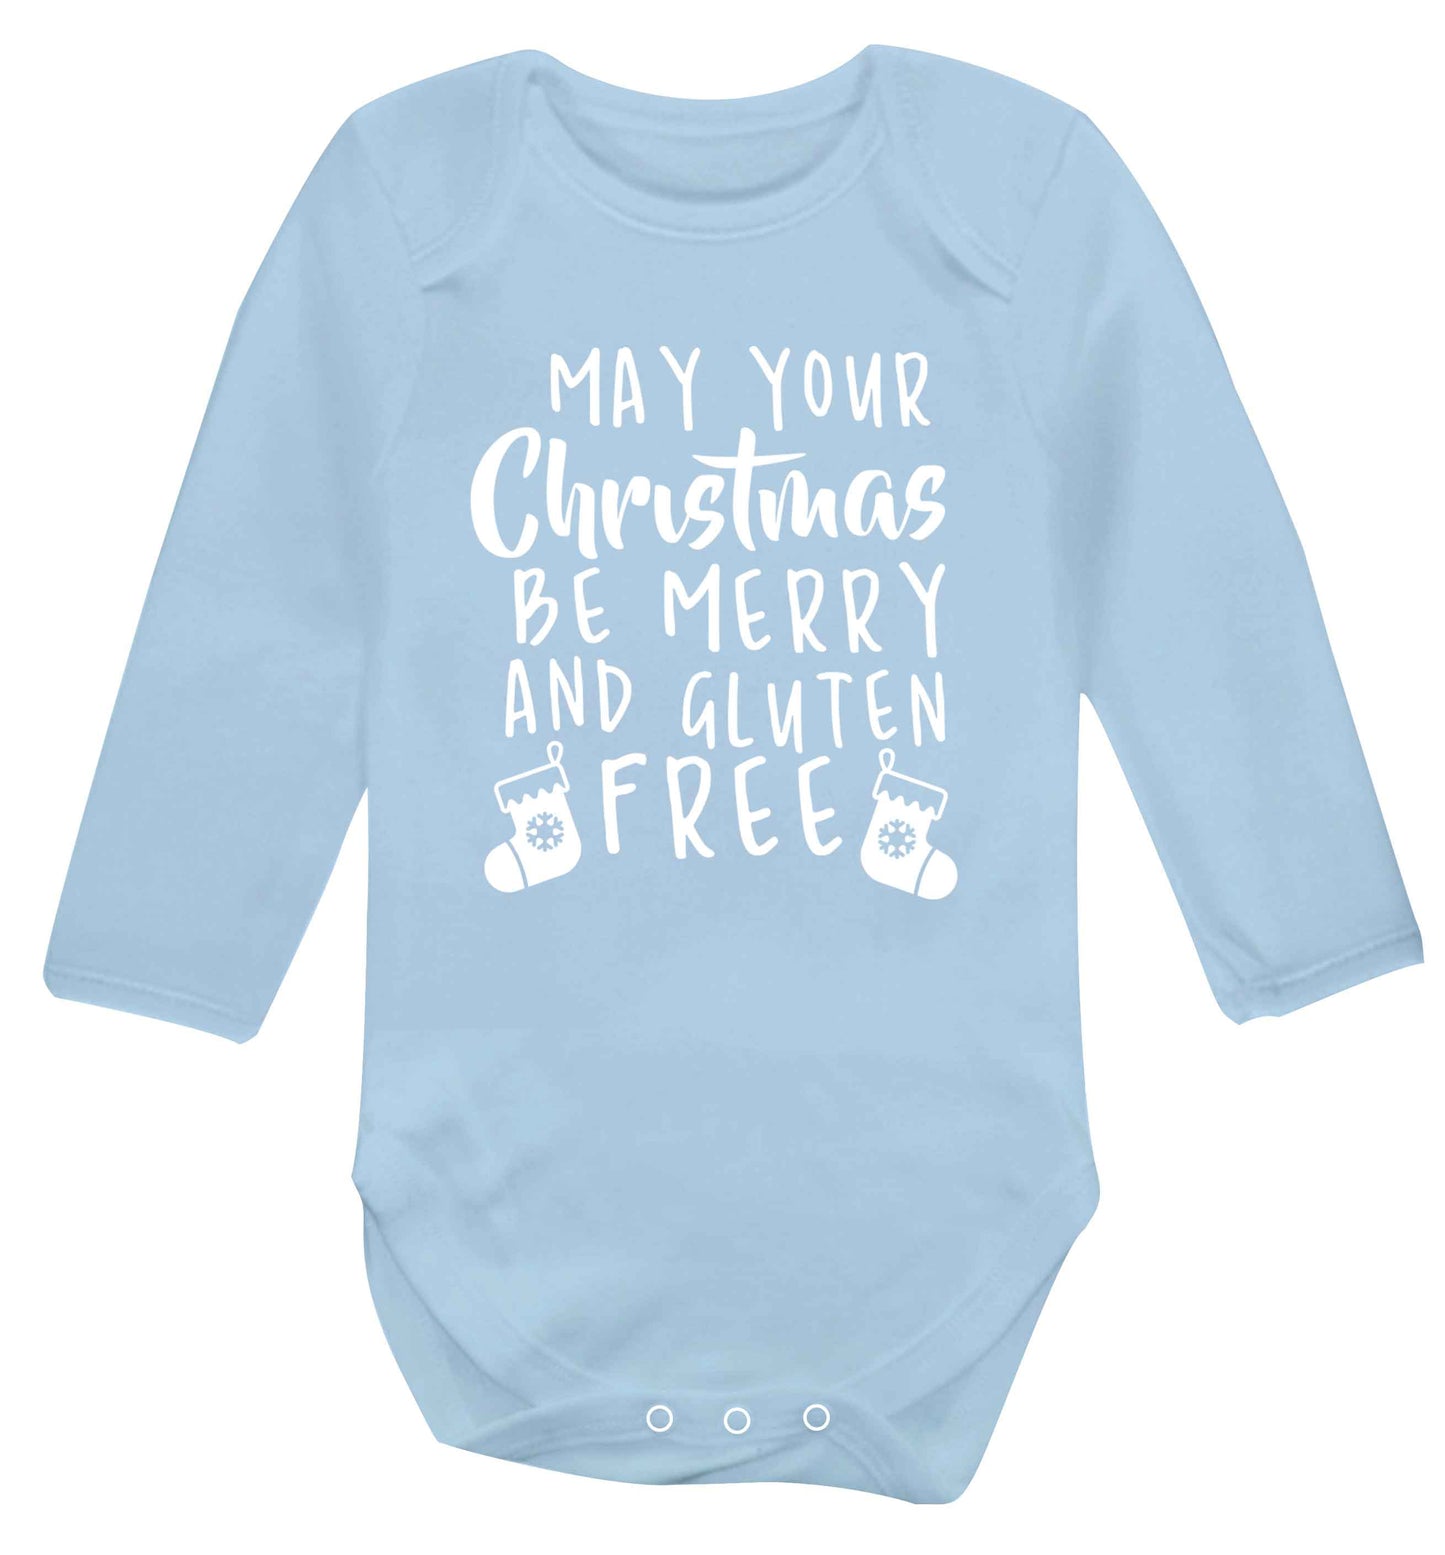 May your Christmas be merry and gluten free Baby Vest long sleeved pale blue 6-12 months